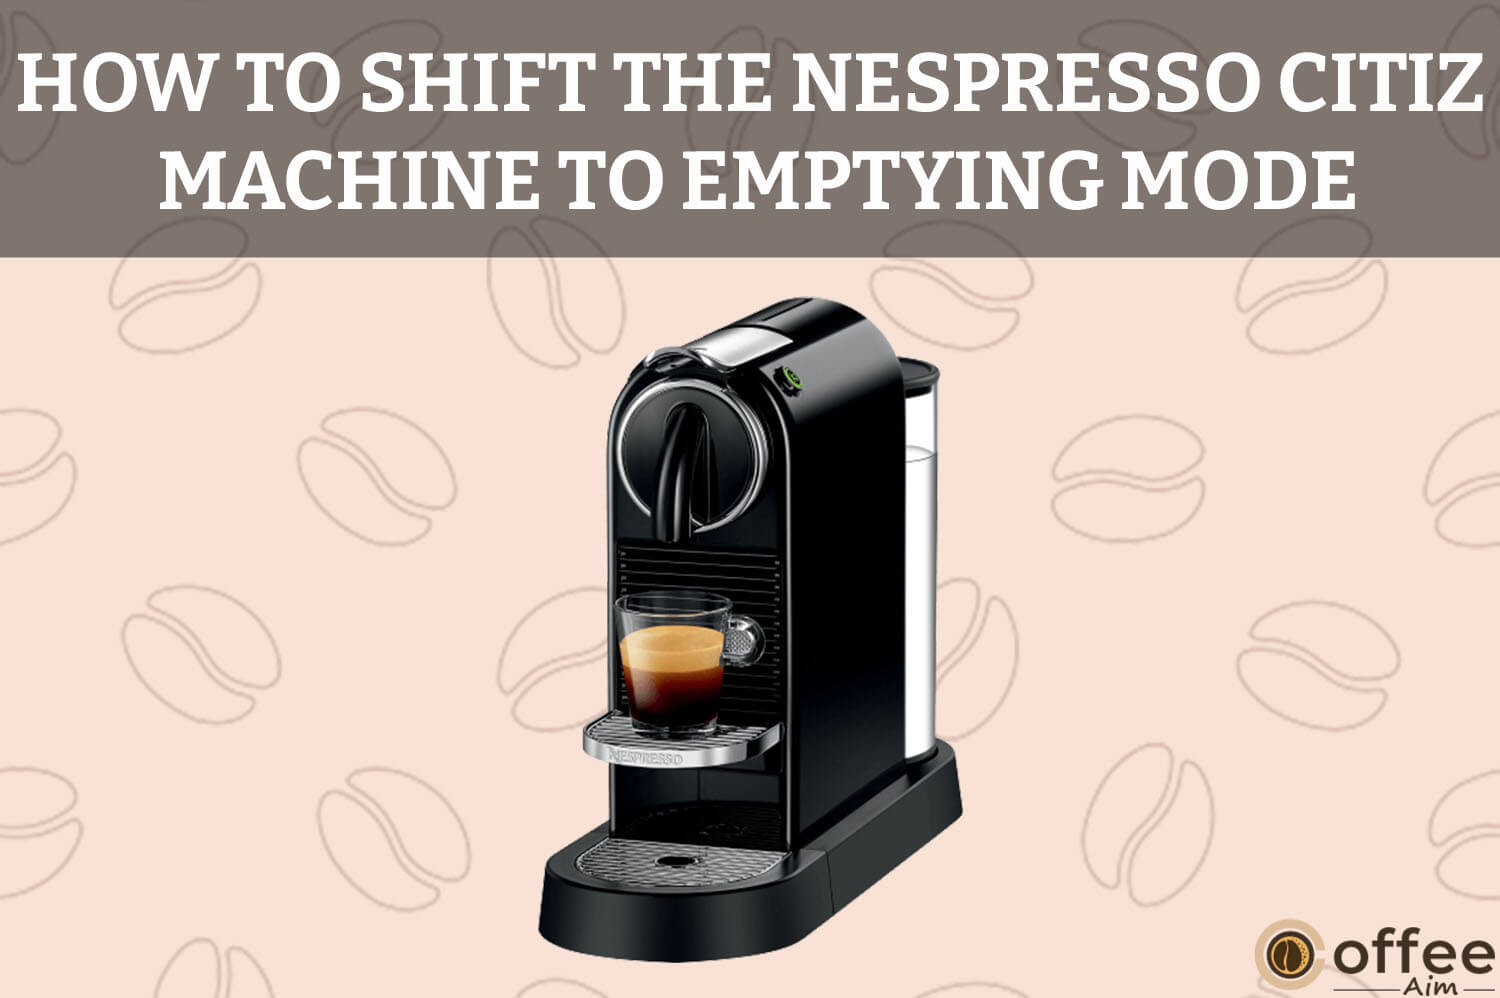 Featured image for the article "How To Shift The Nespresso Citiz Machine To Emptying Mode"